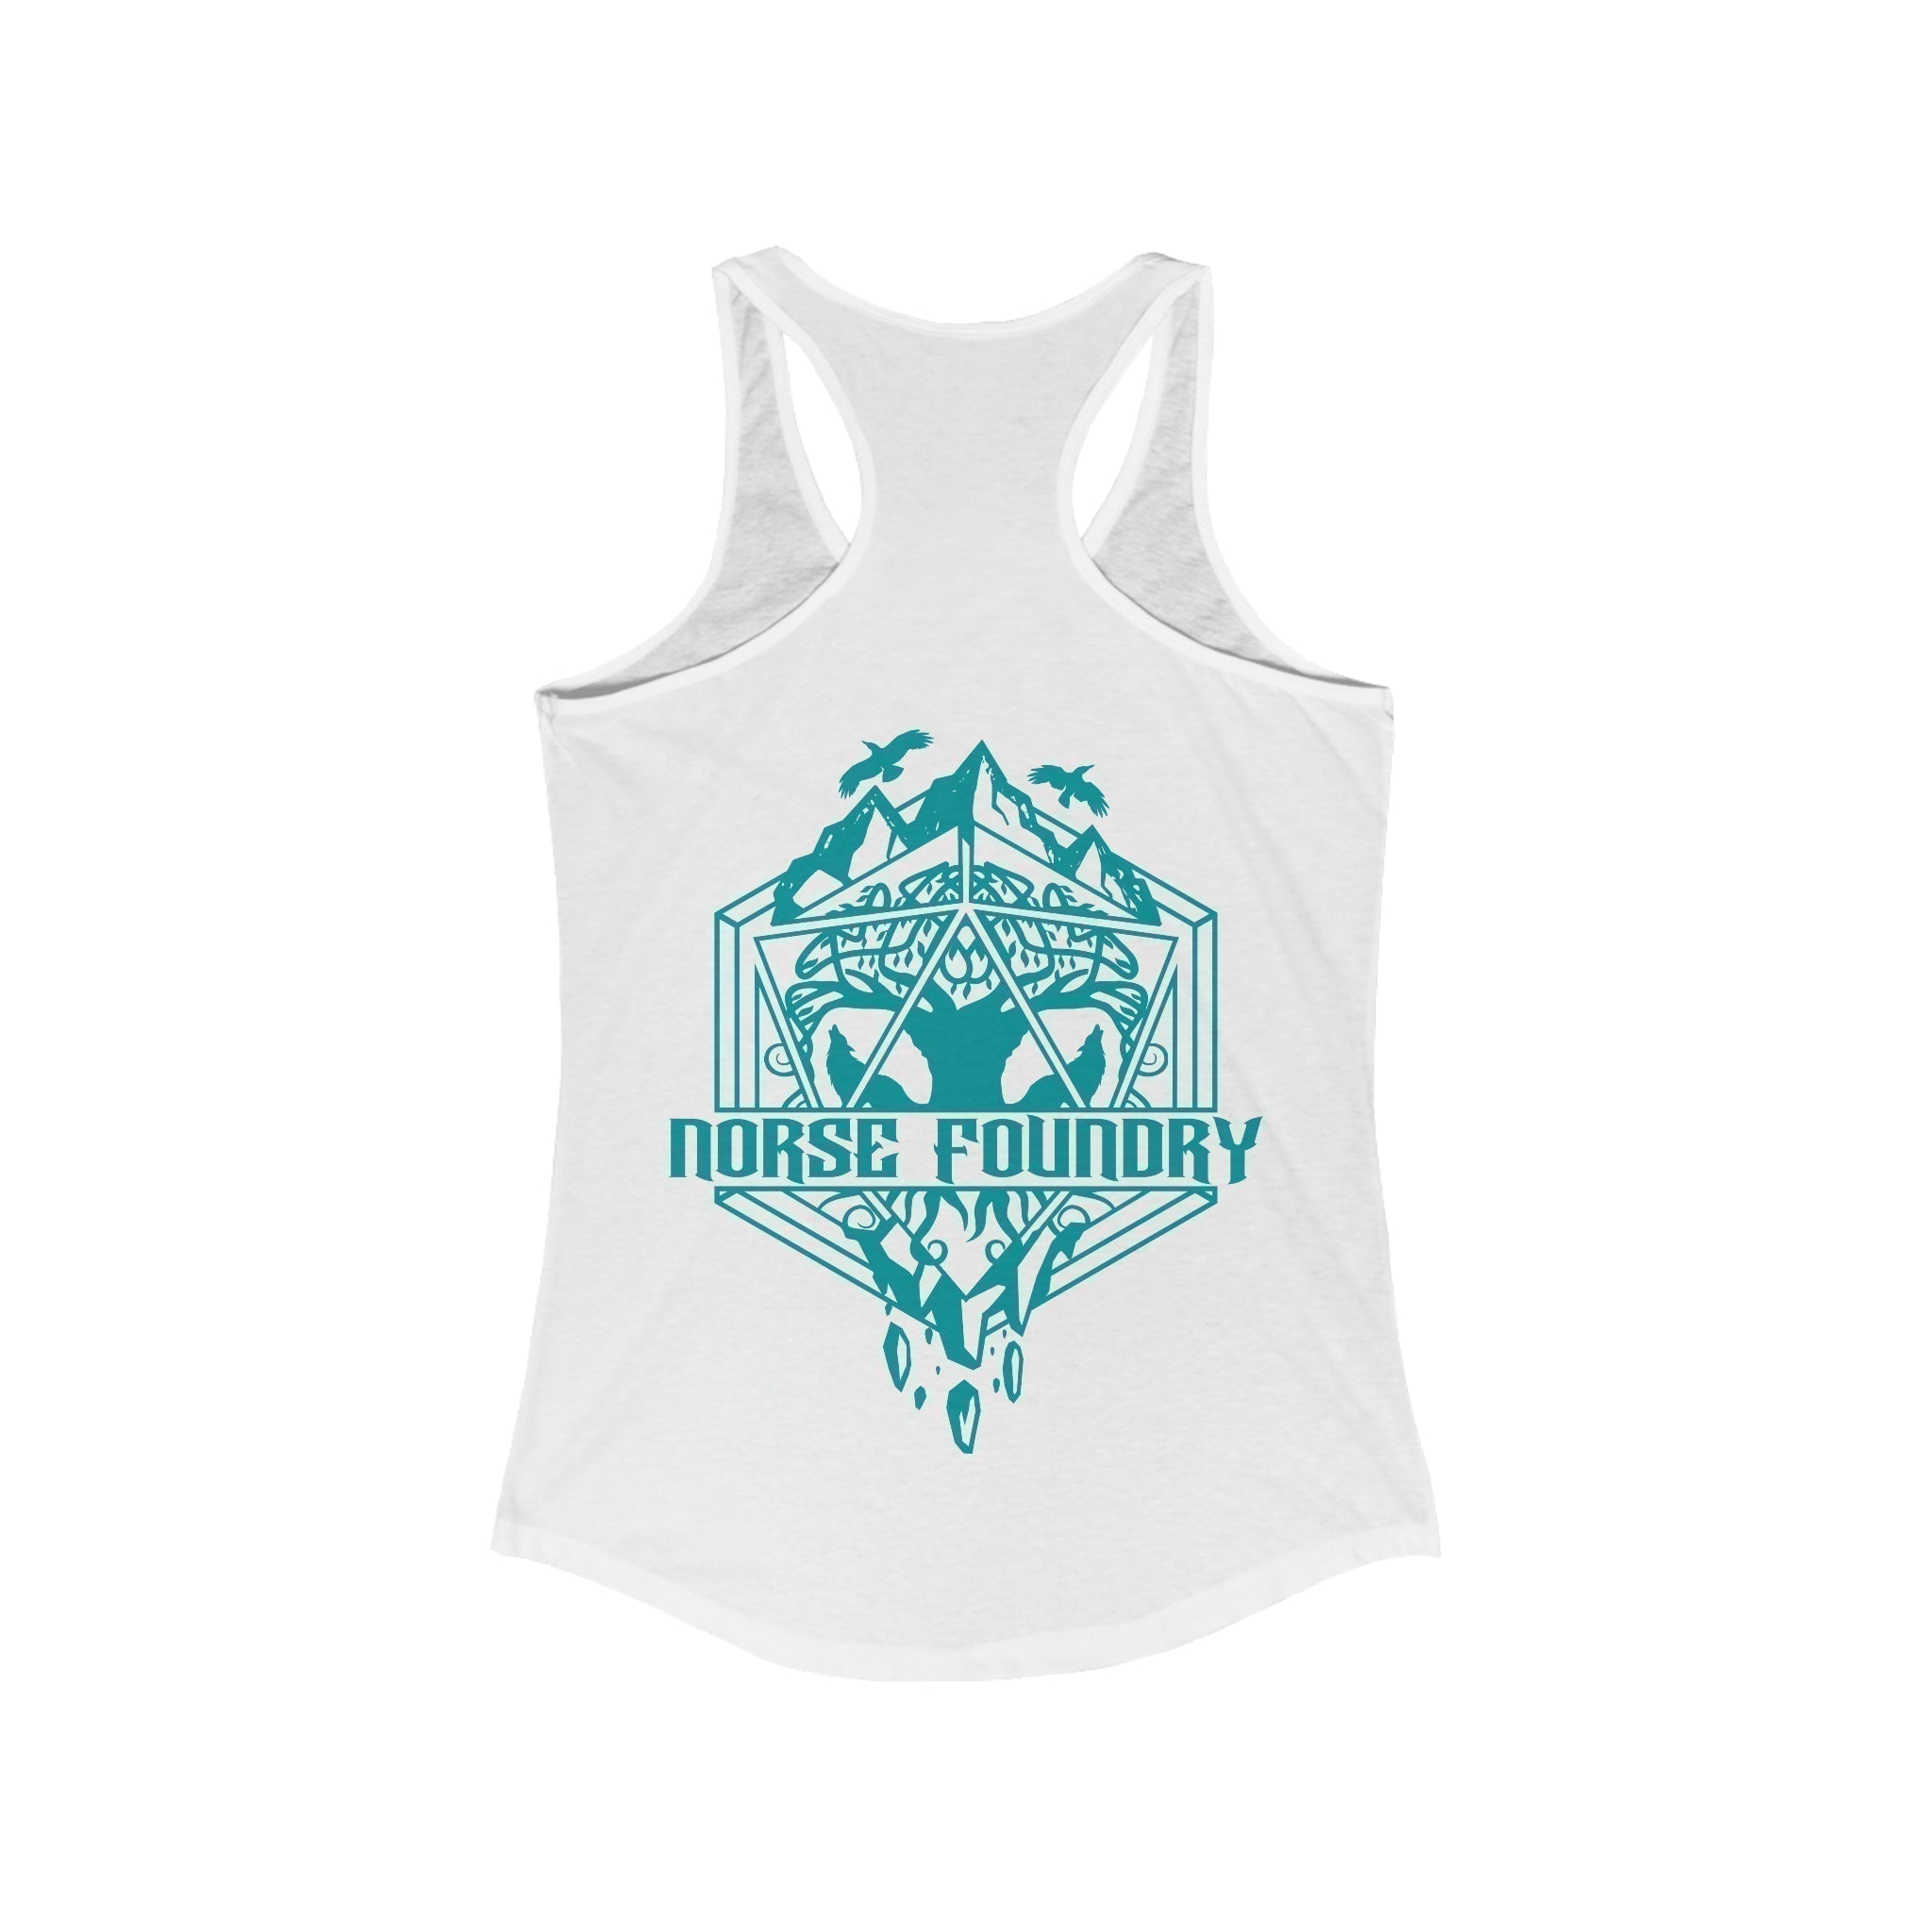 Roll for Adventure - Norse Foundry Women's Tank Top - 14702122520113842365